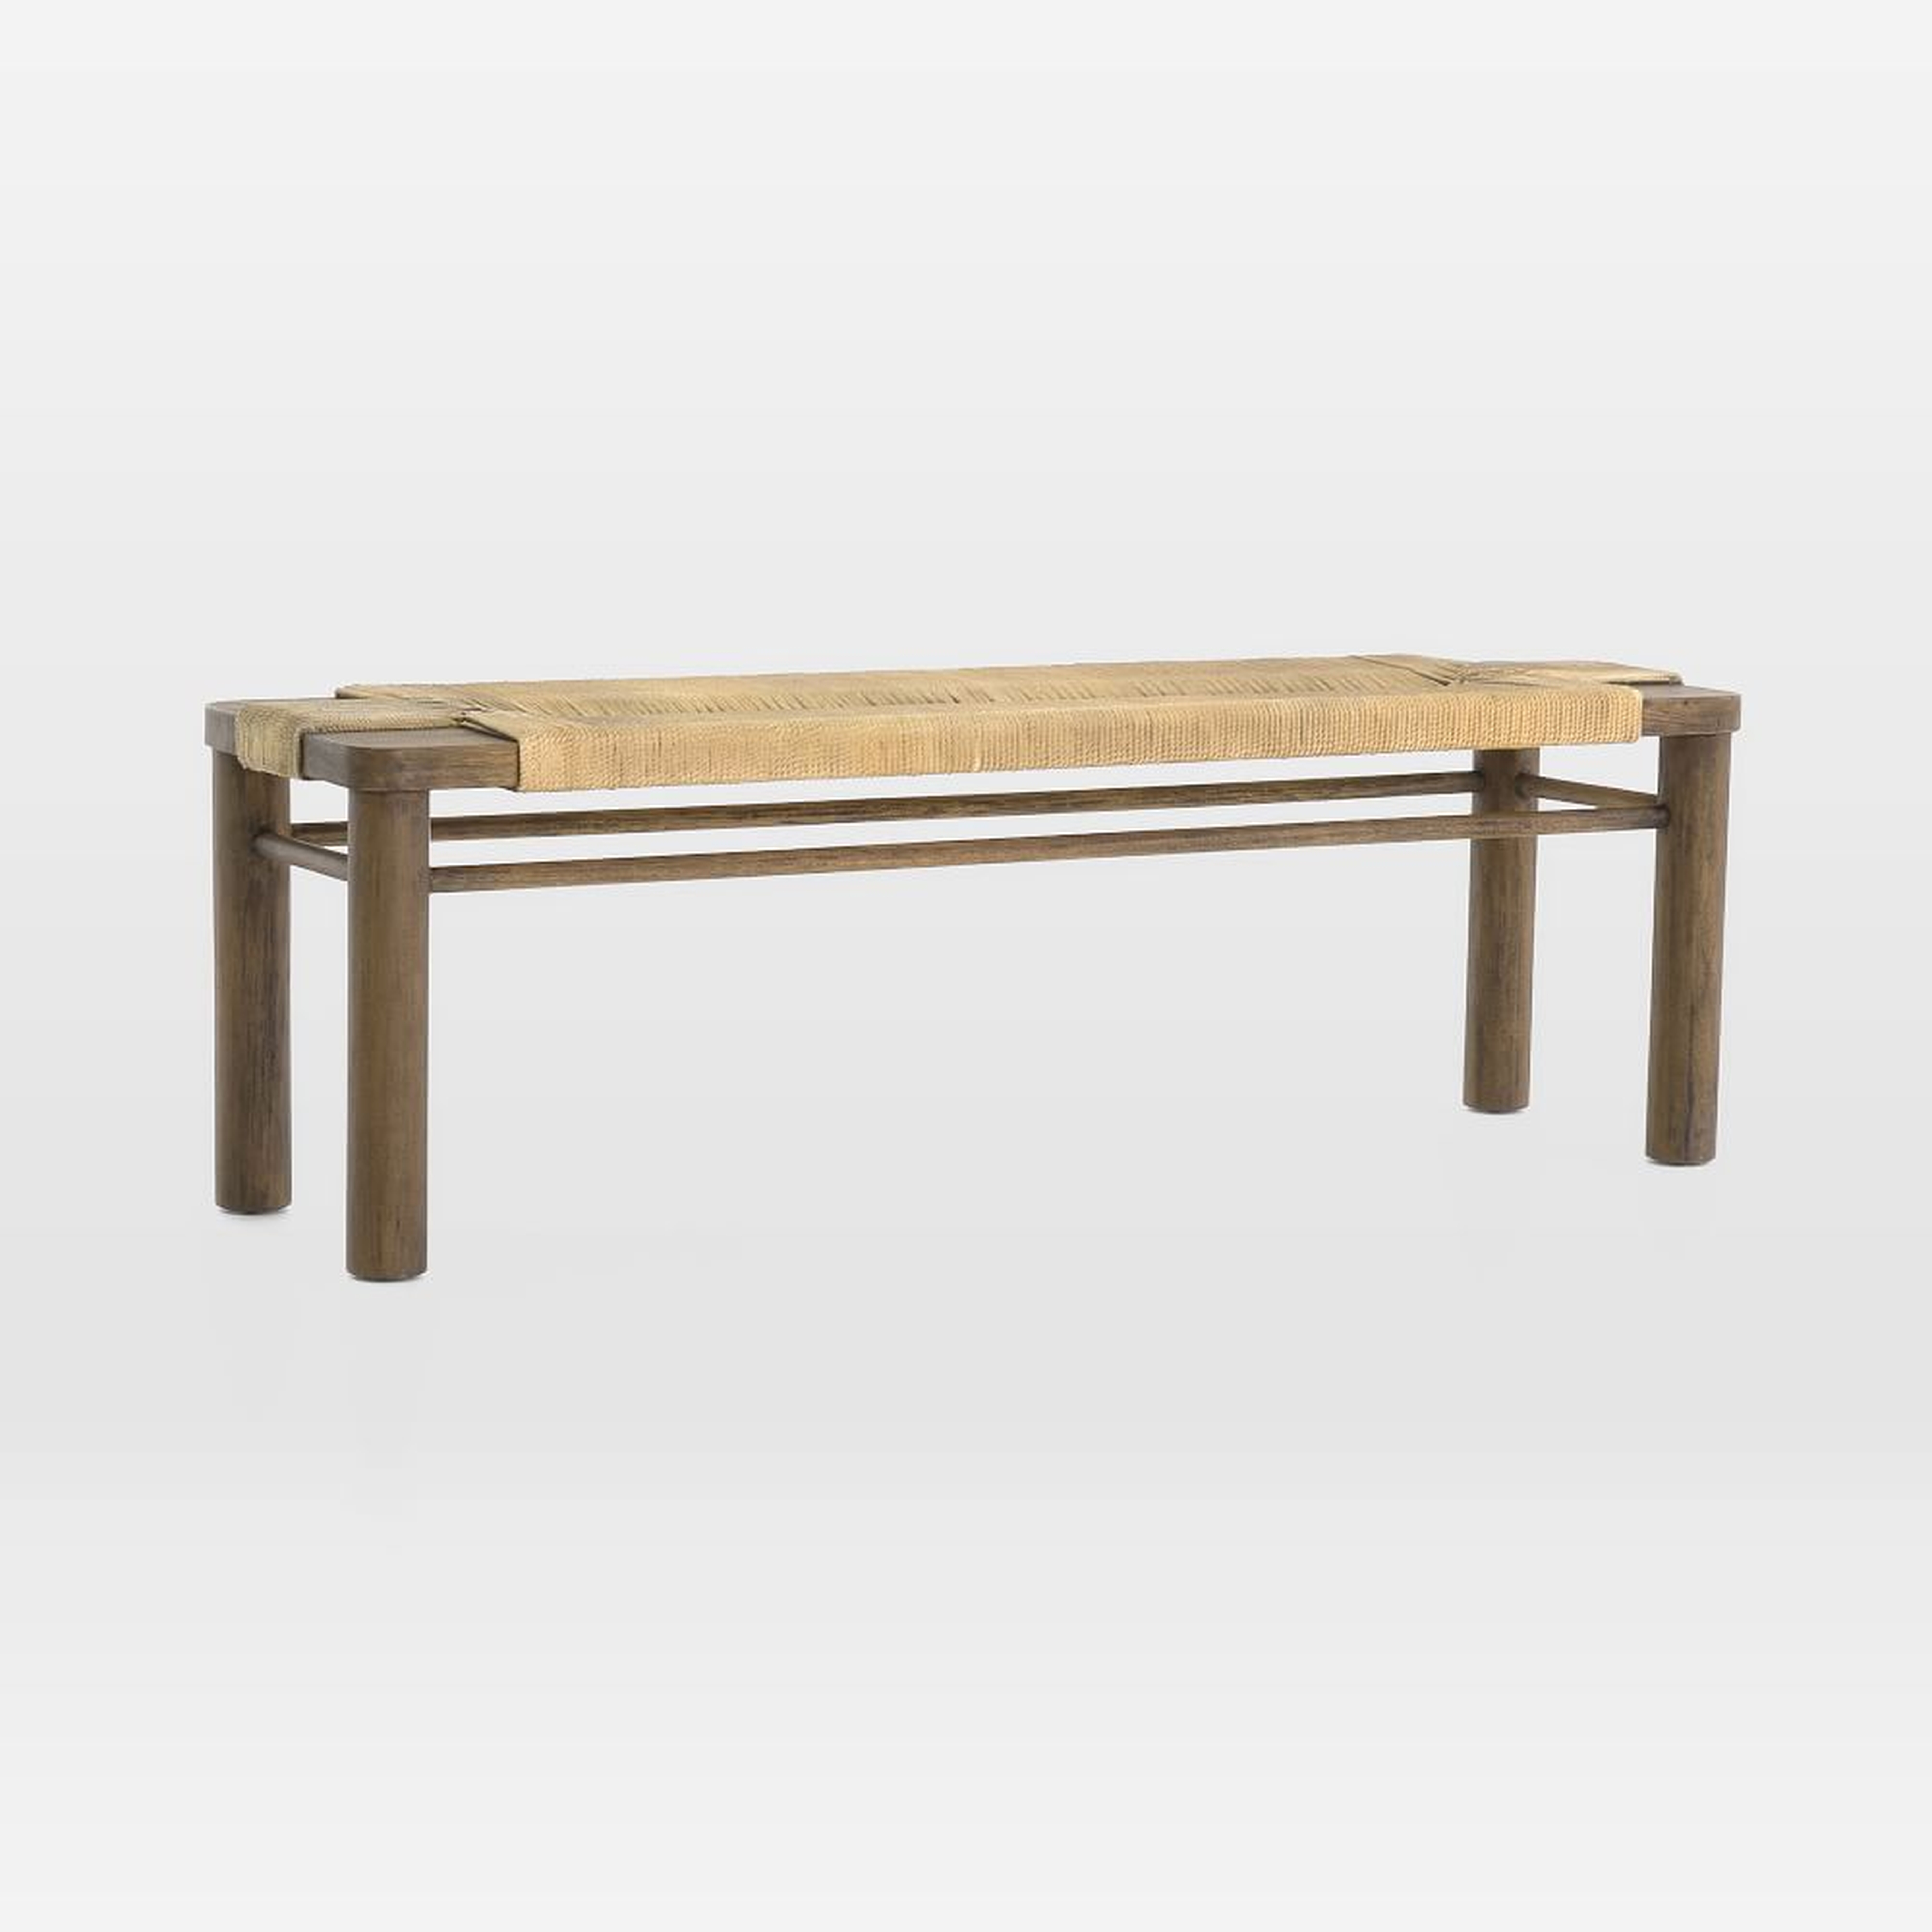 Mahogany Woven Rope Bench - West Elm